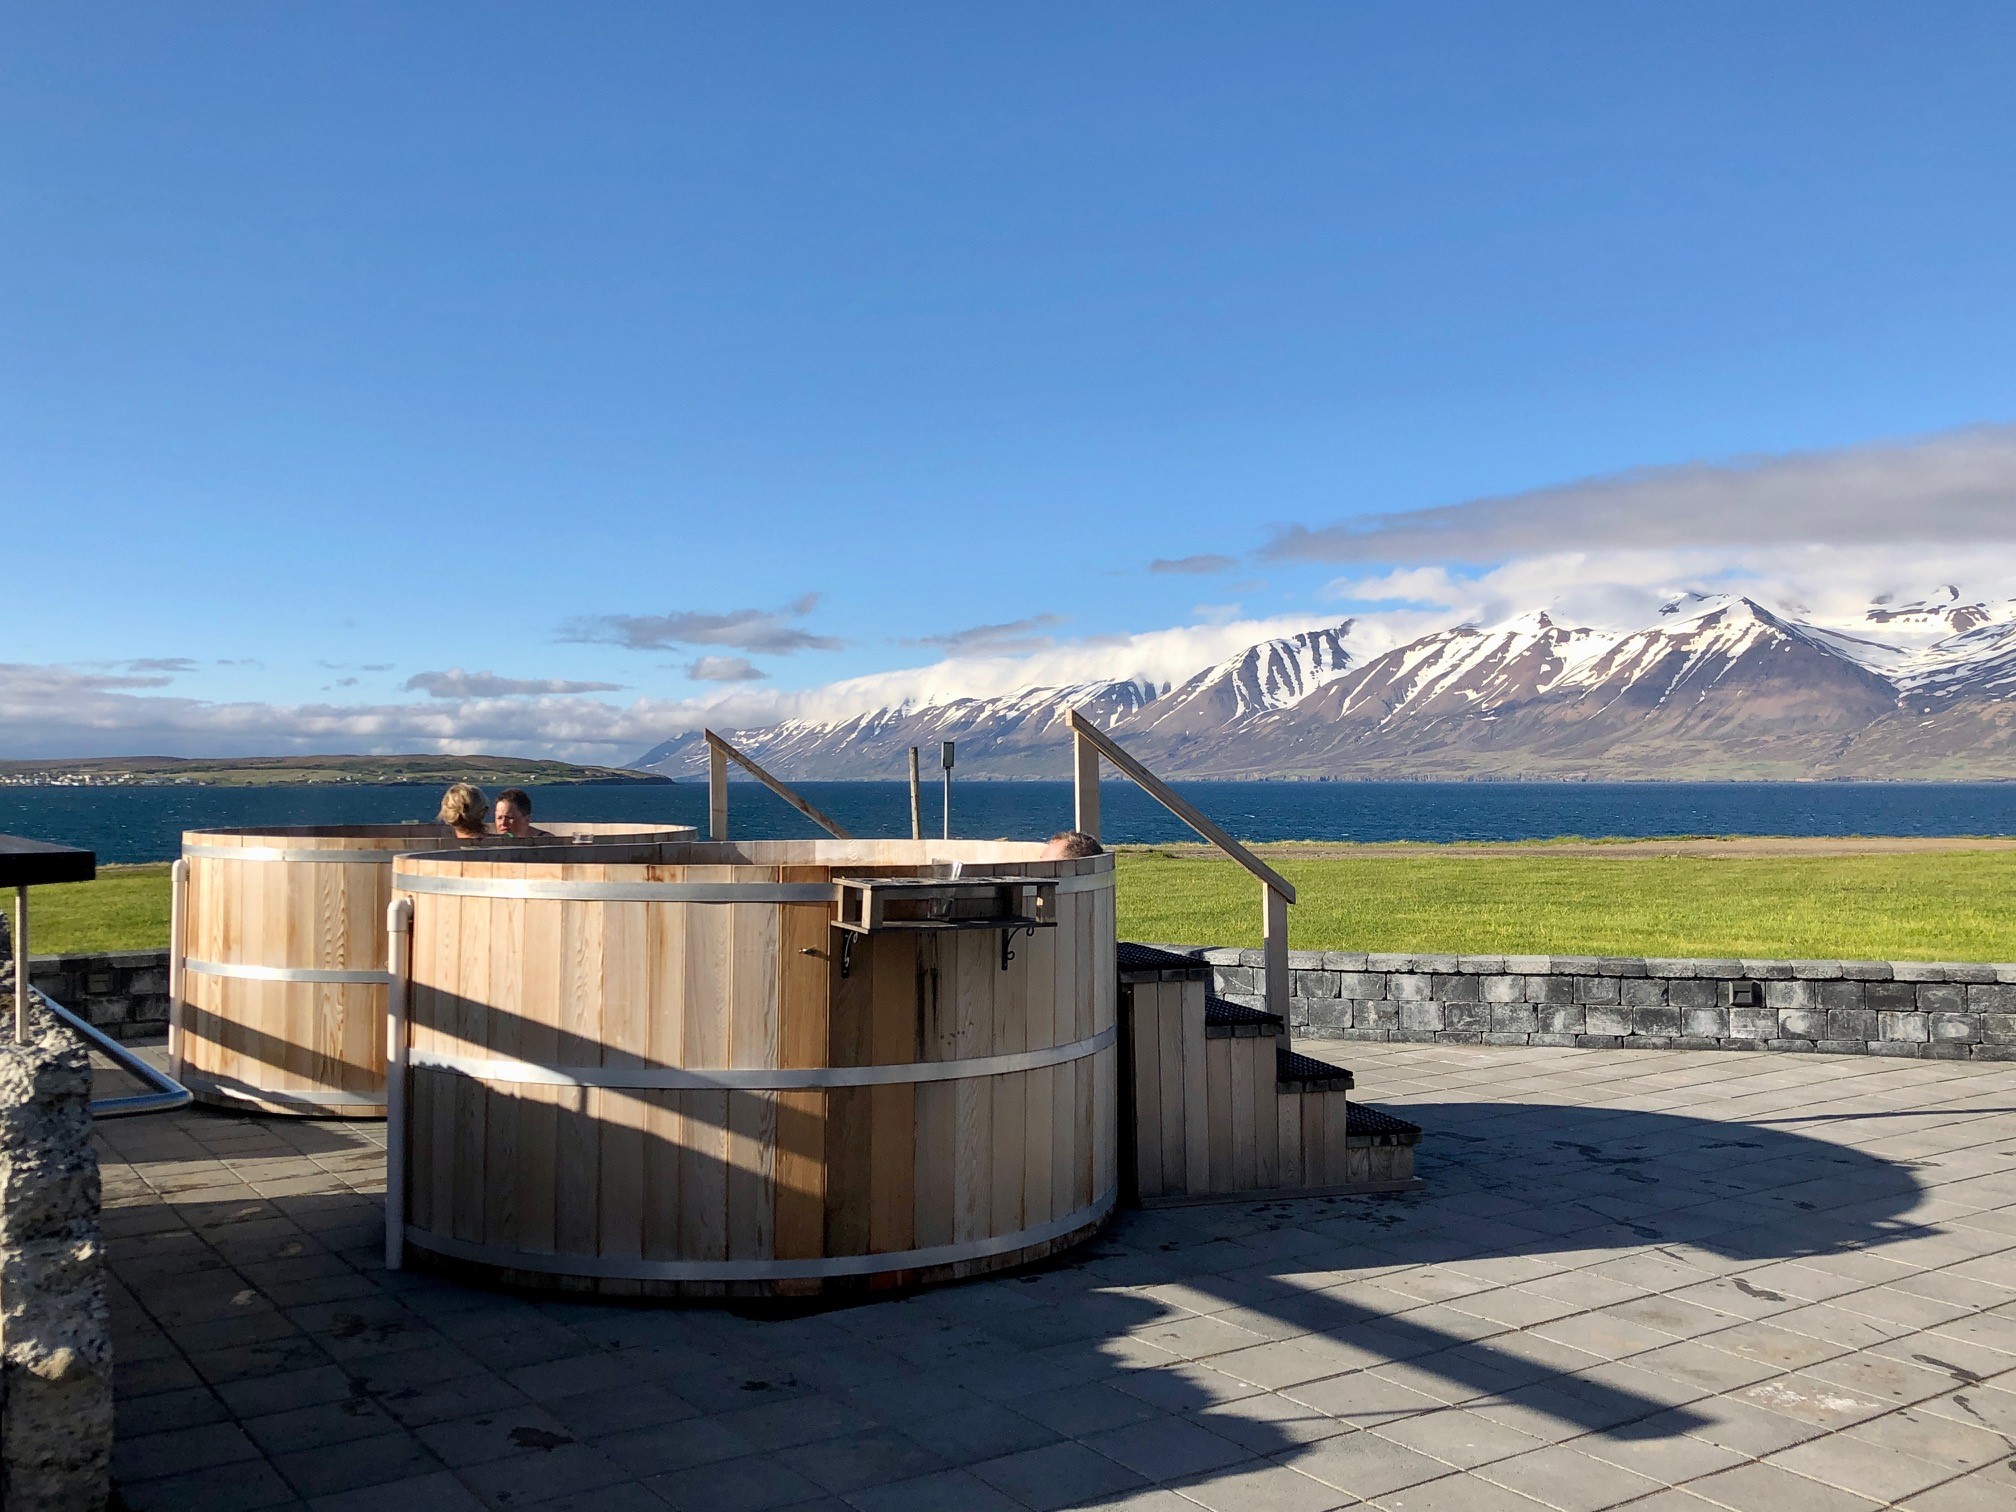 The outdoor spa baths at Bjórböðin beer spa in north Iceland, with fjord and mountain views